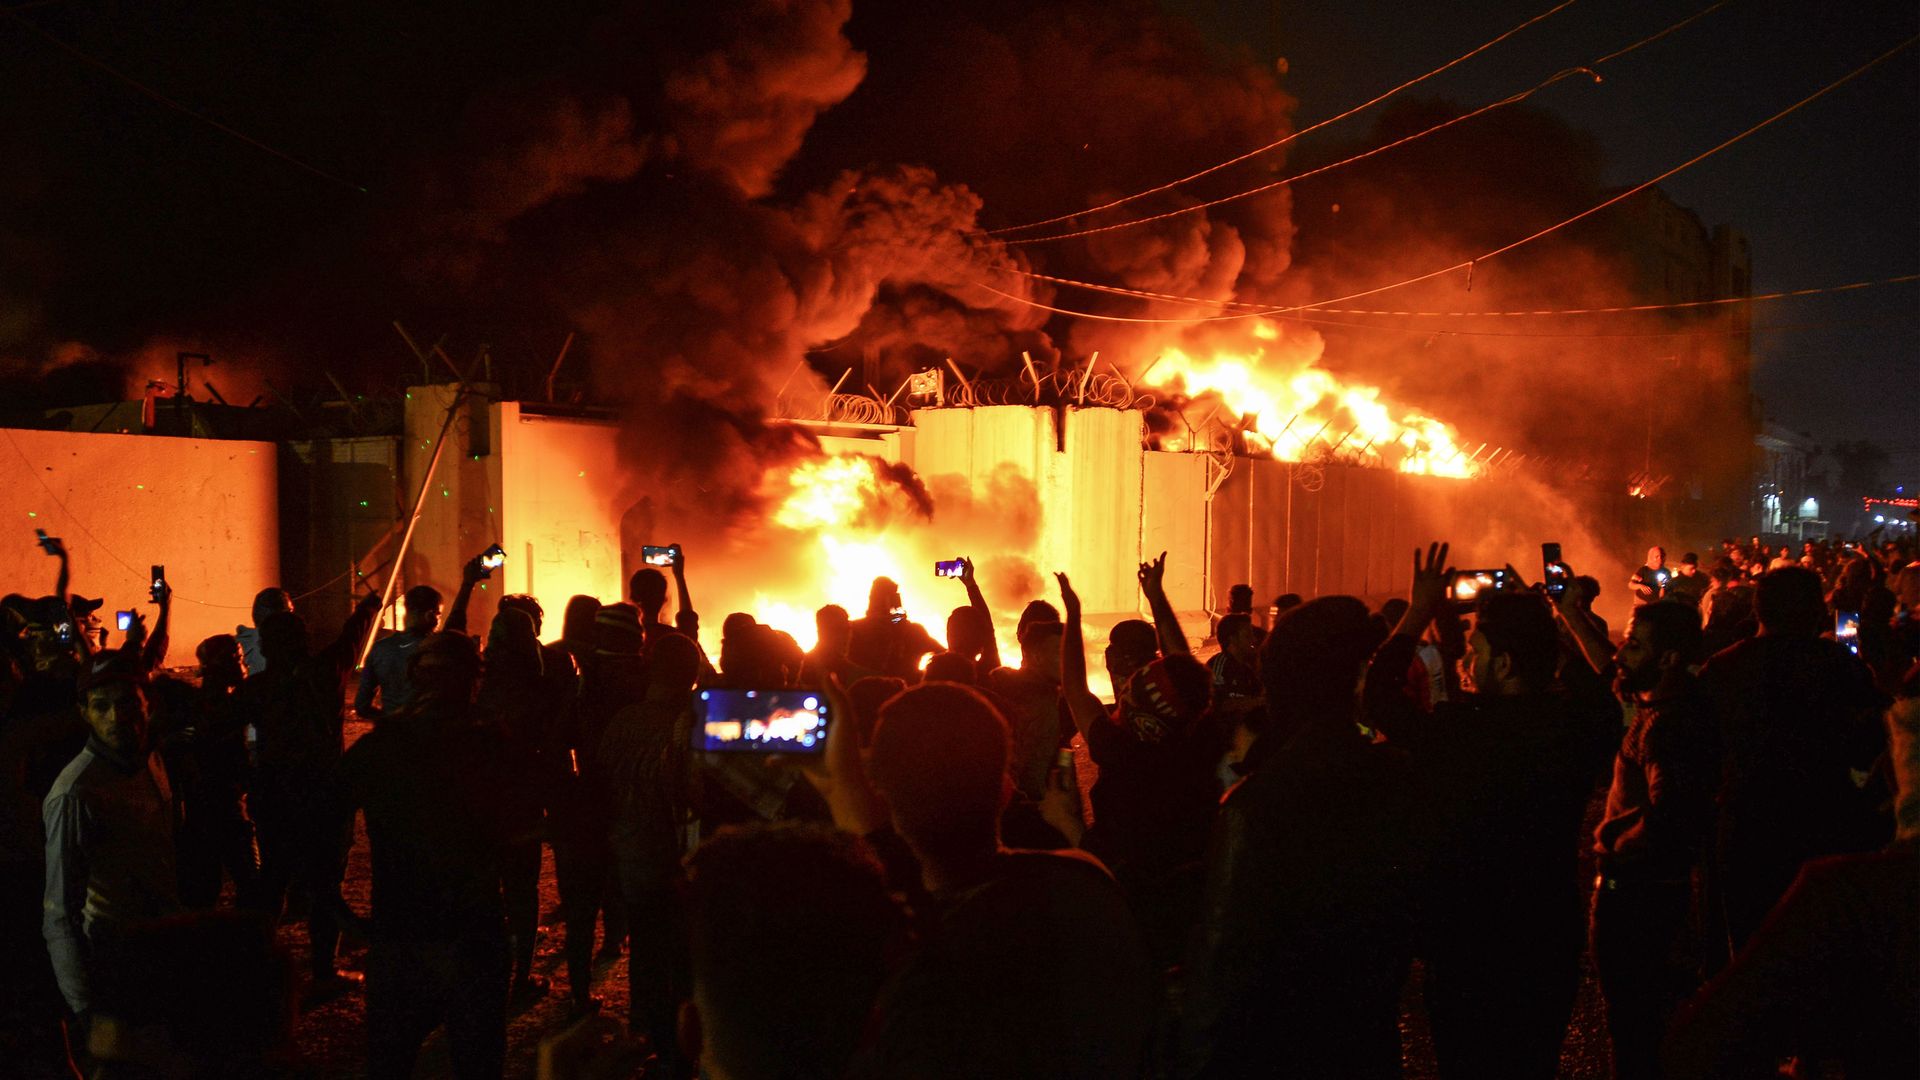 Iraqi demonstrators gather as flames start consuming Iran's consulate in the southern Iraqi Shiite holy city of Najaf